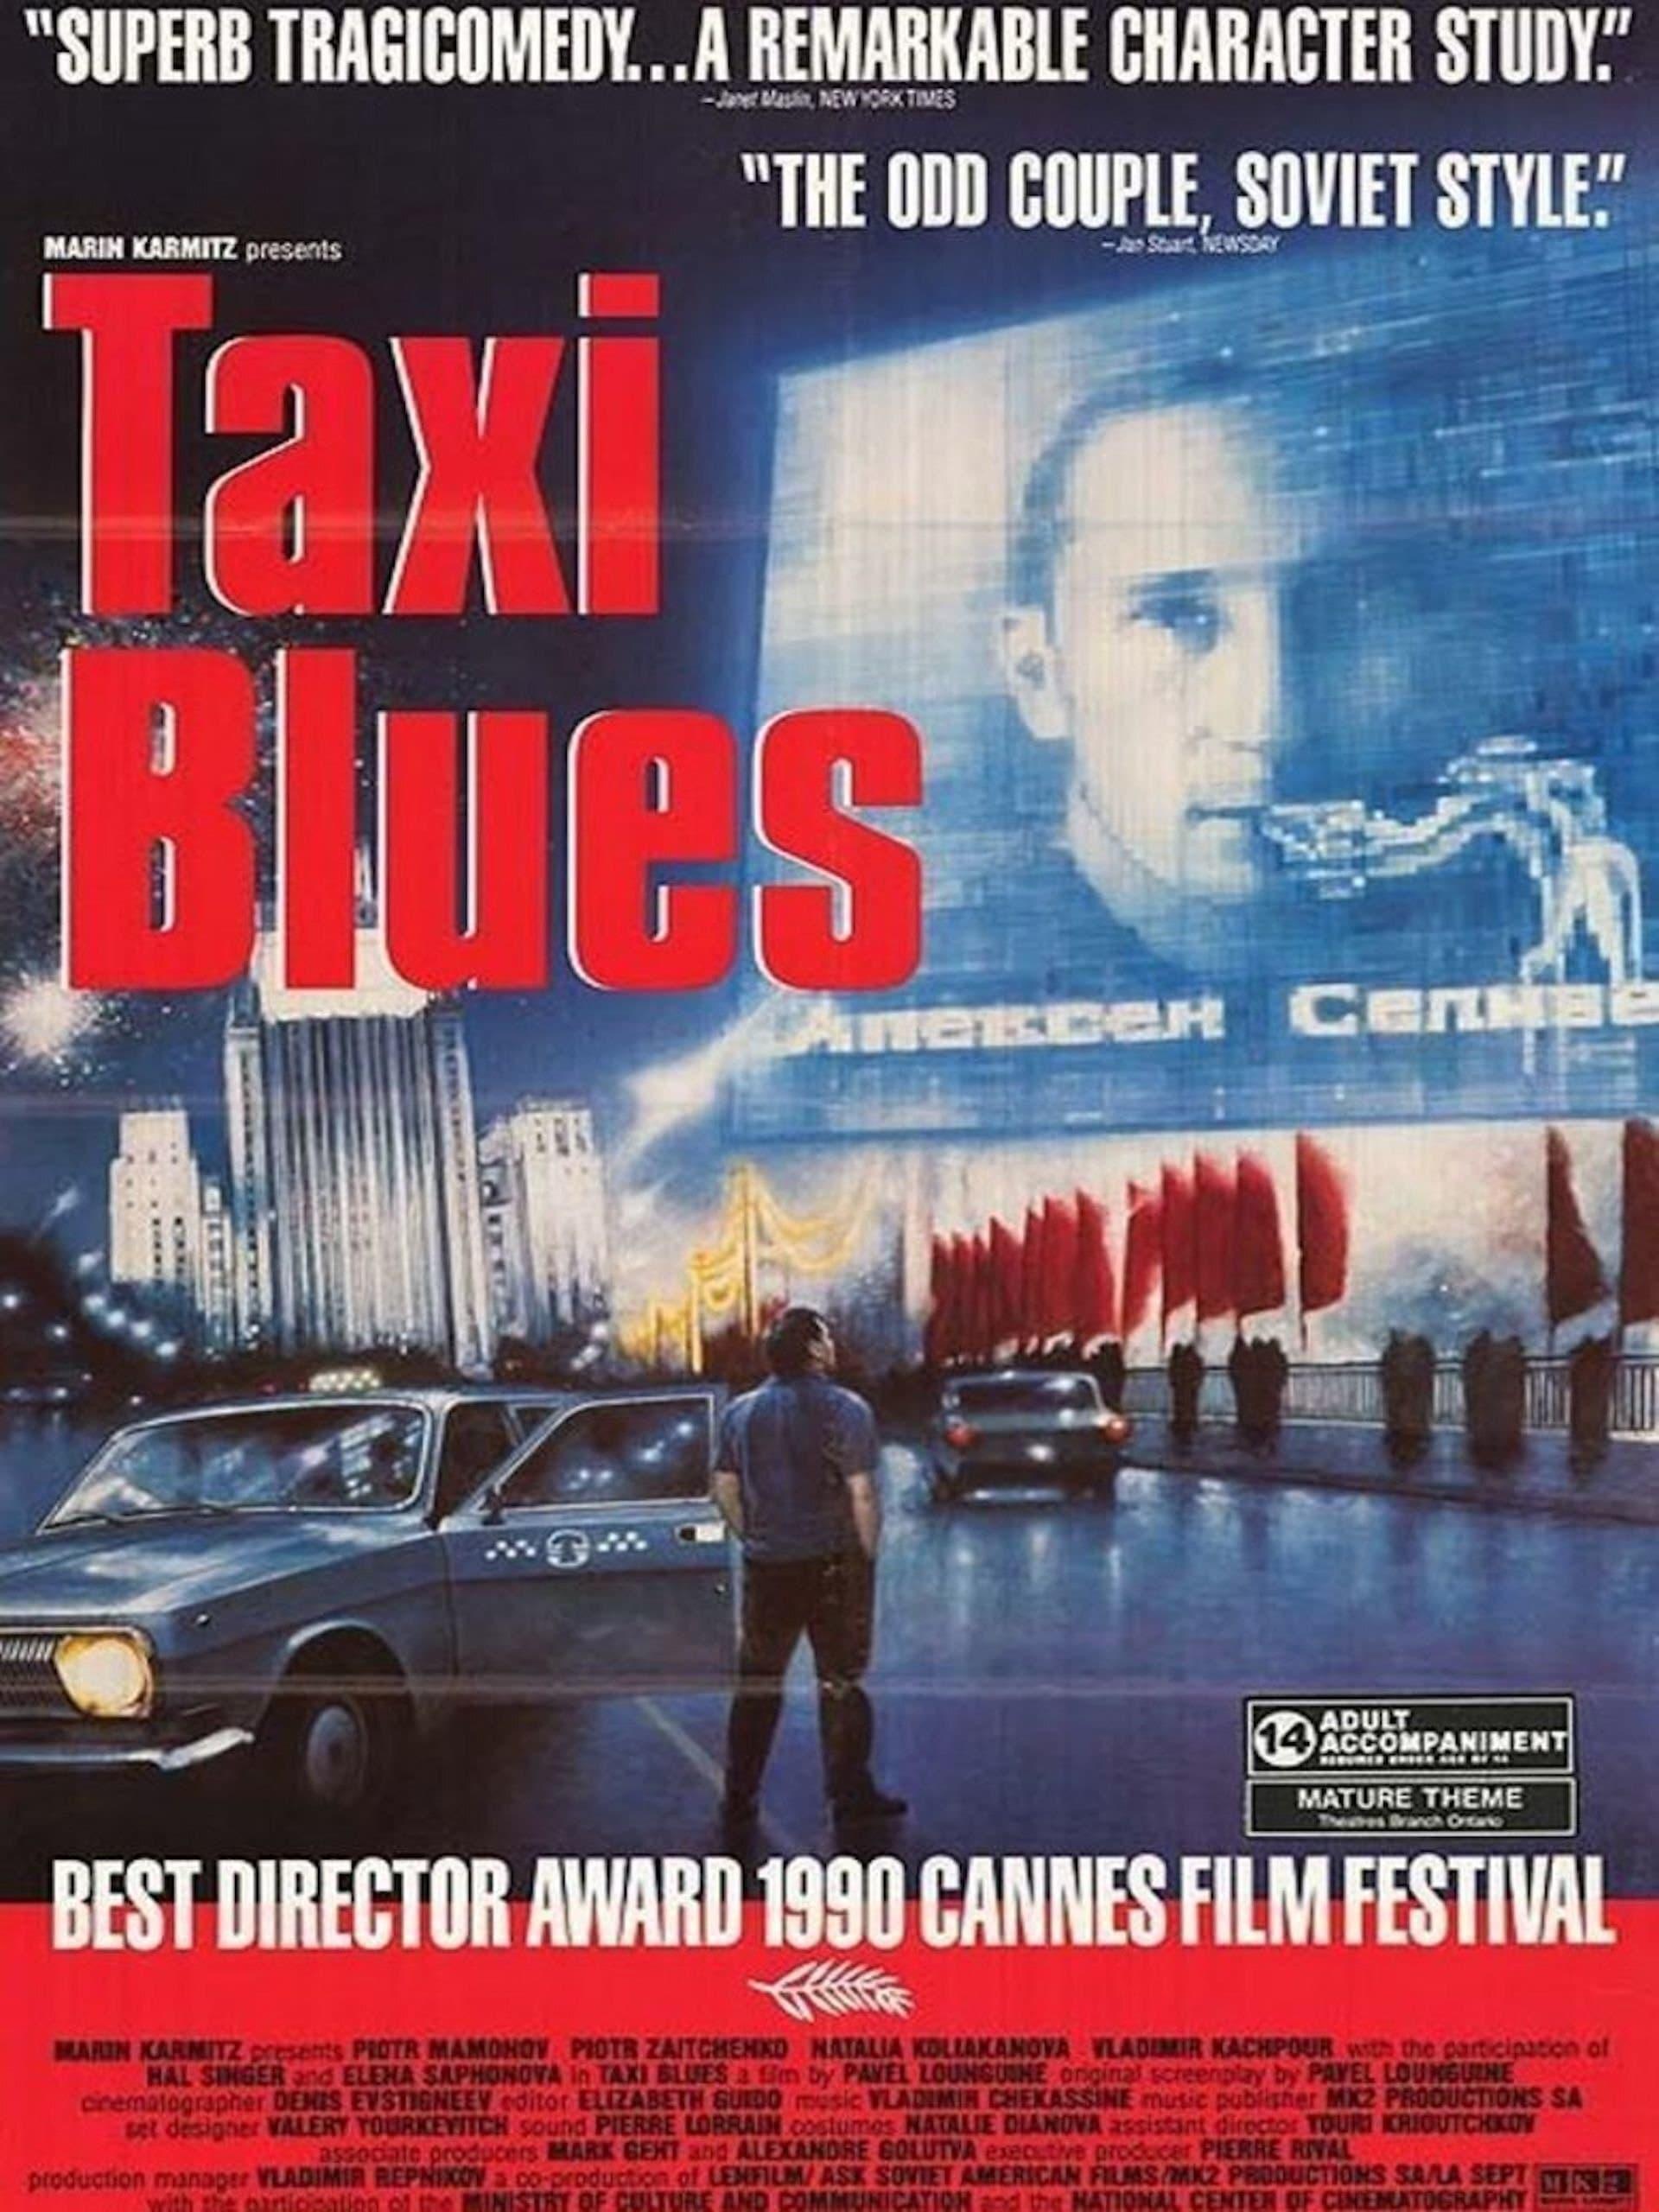 Taxi Blues poster